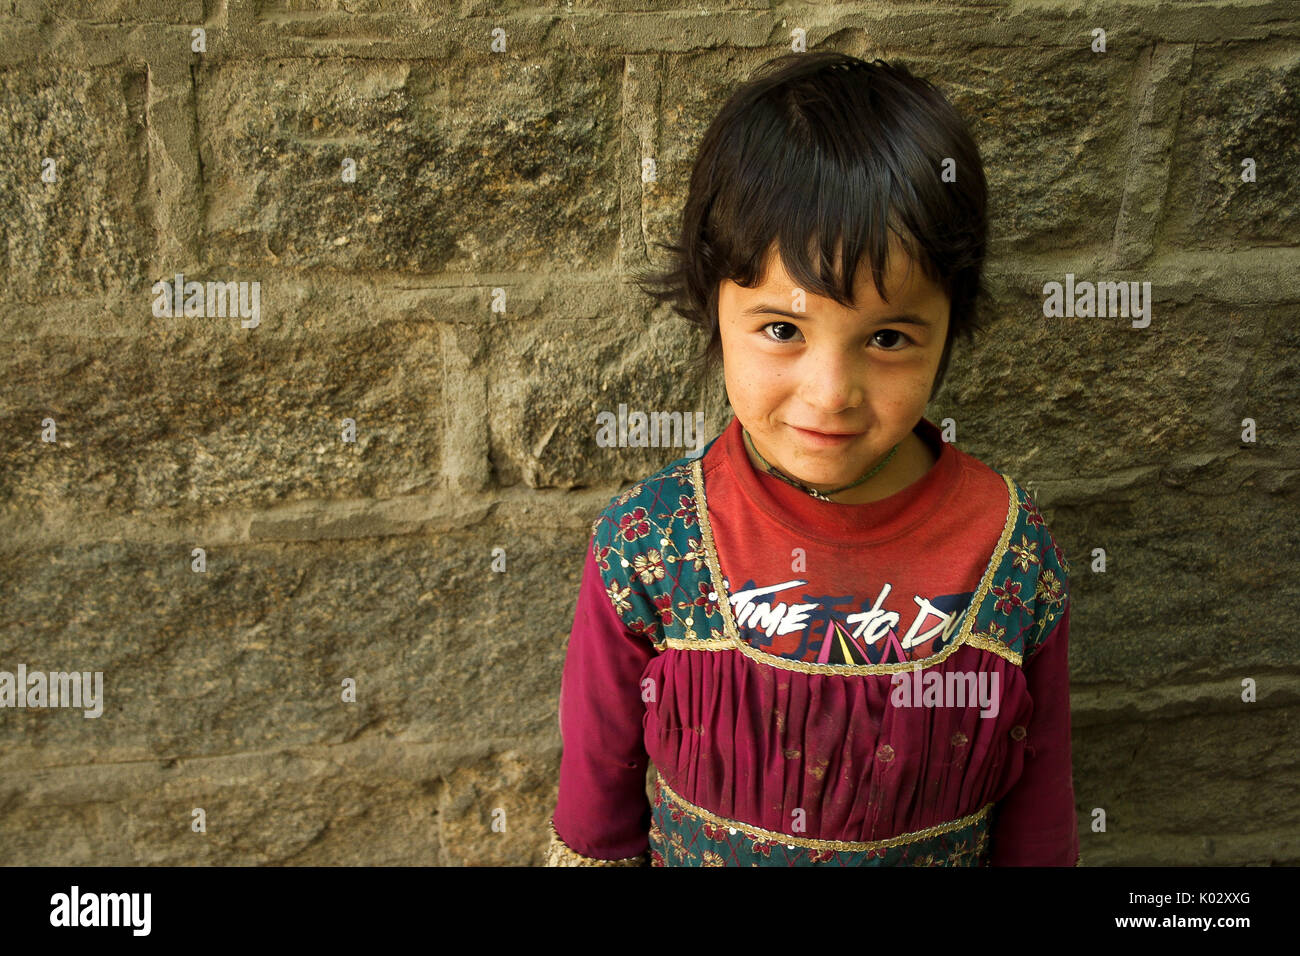 A Kid Beautiful face and innocent smile Stock Photo